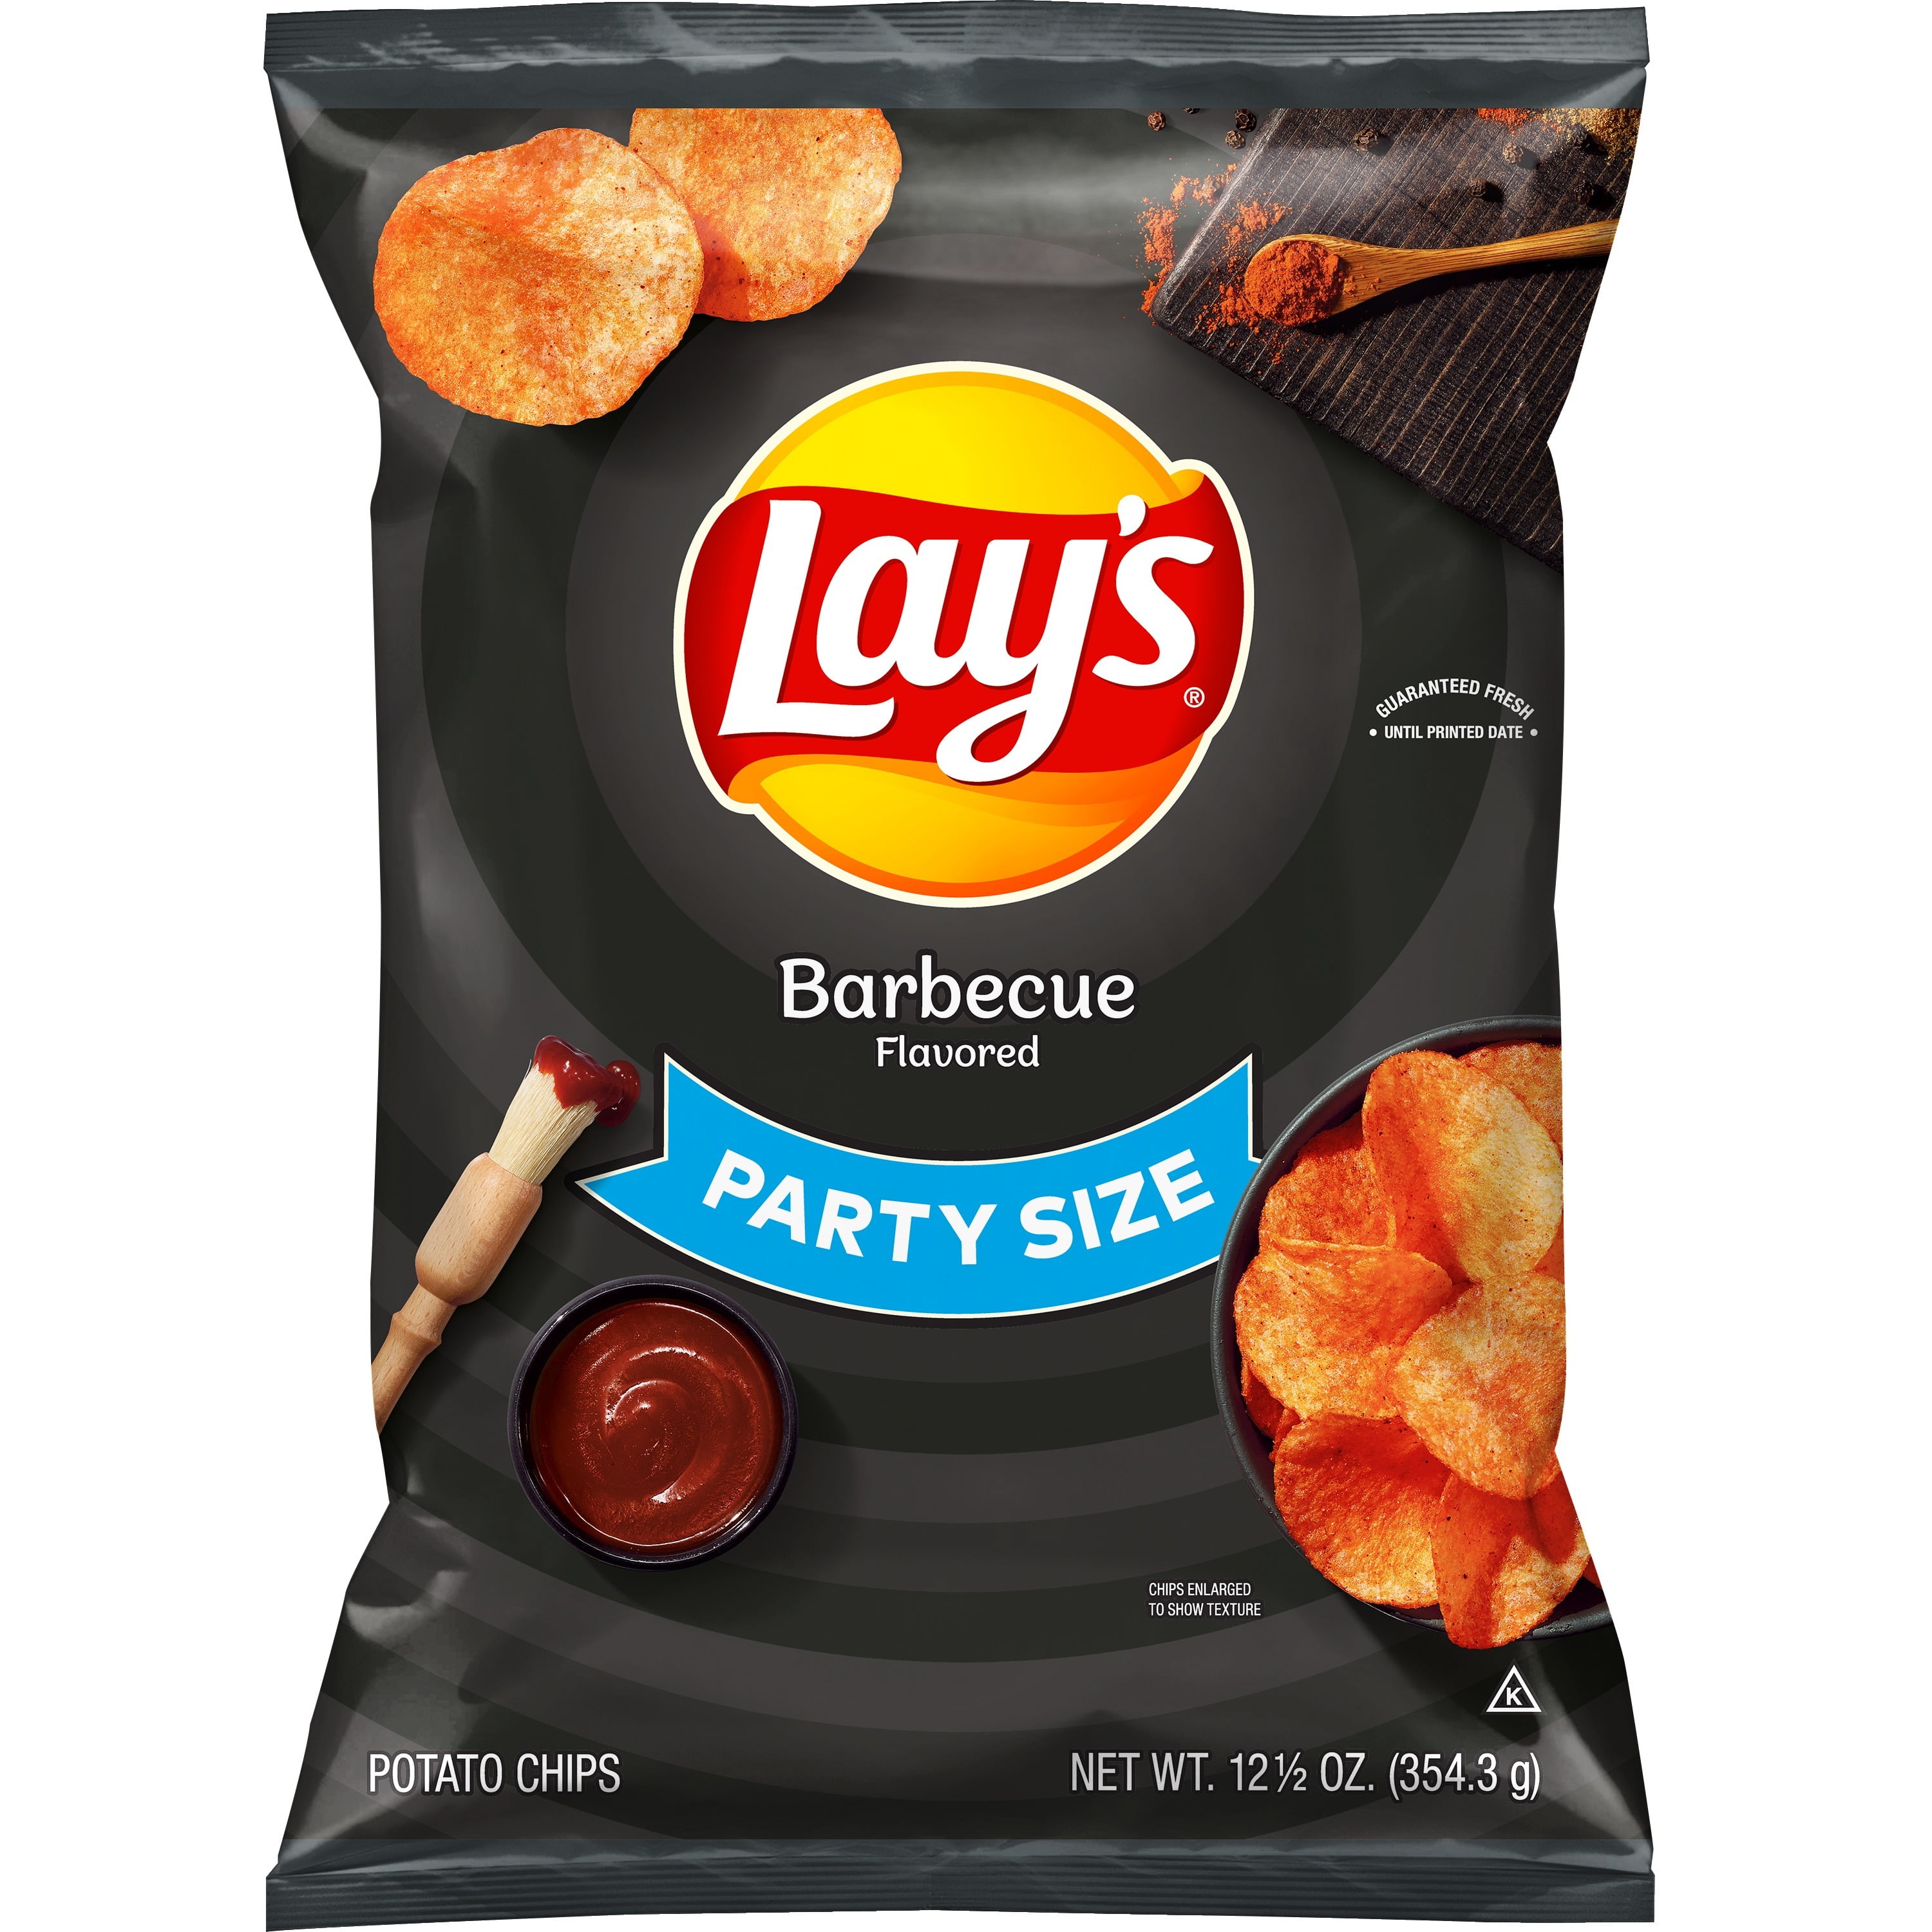 Lays Barbecue Flavored Potato Chips Party Size 125 Oz Bag